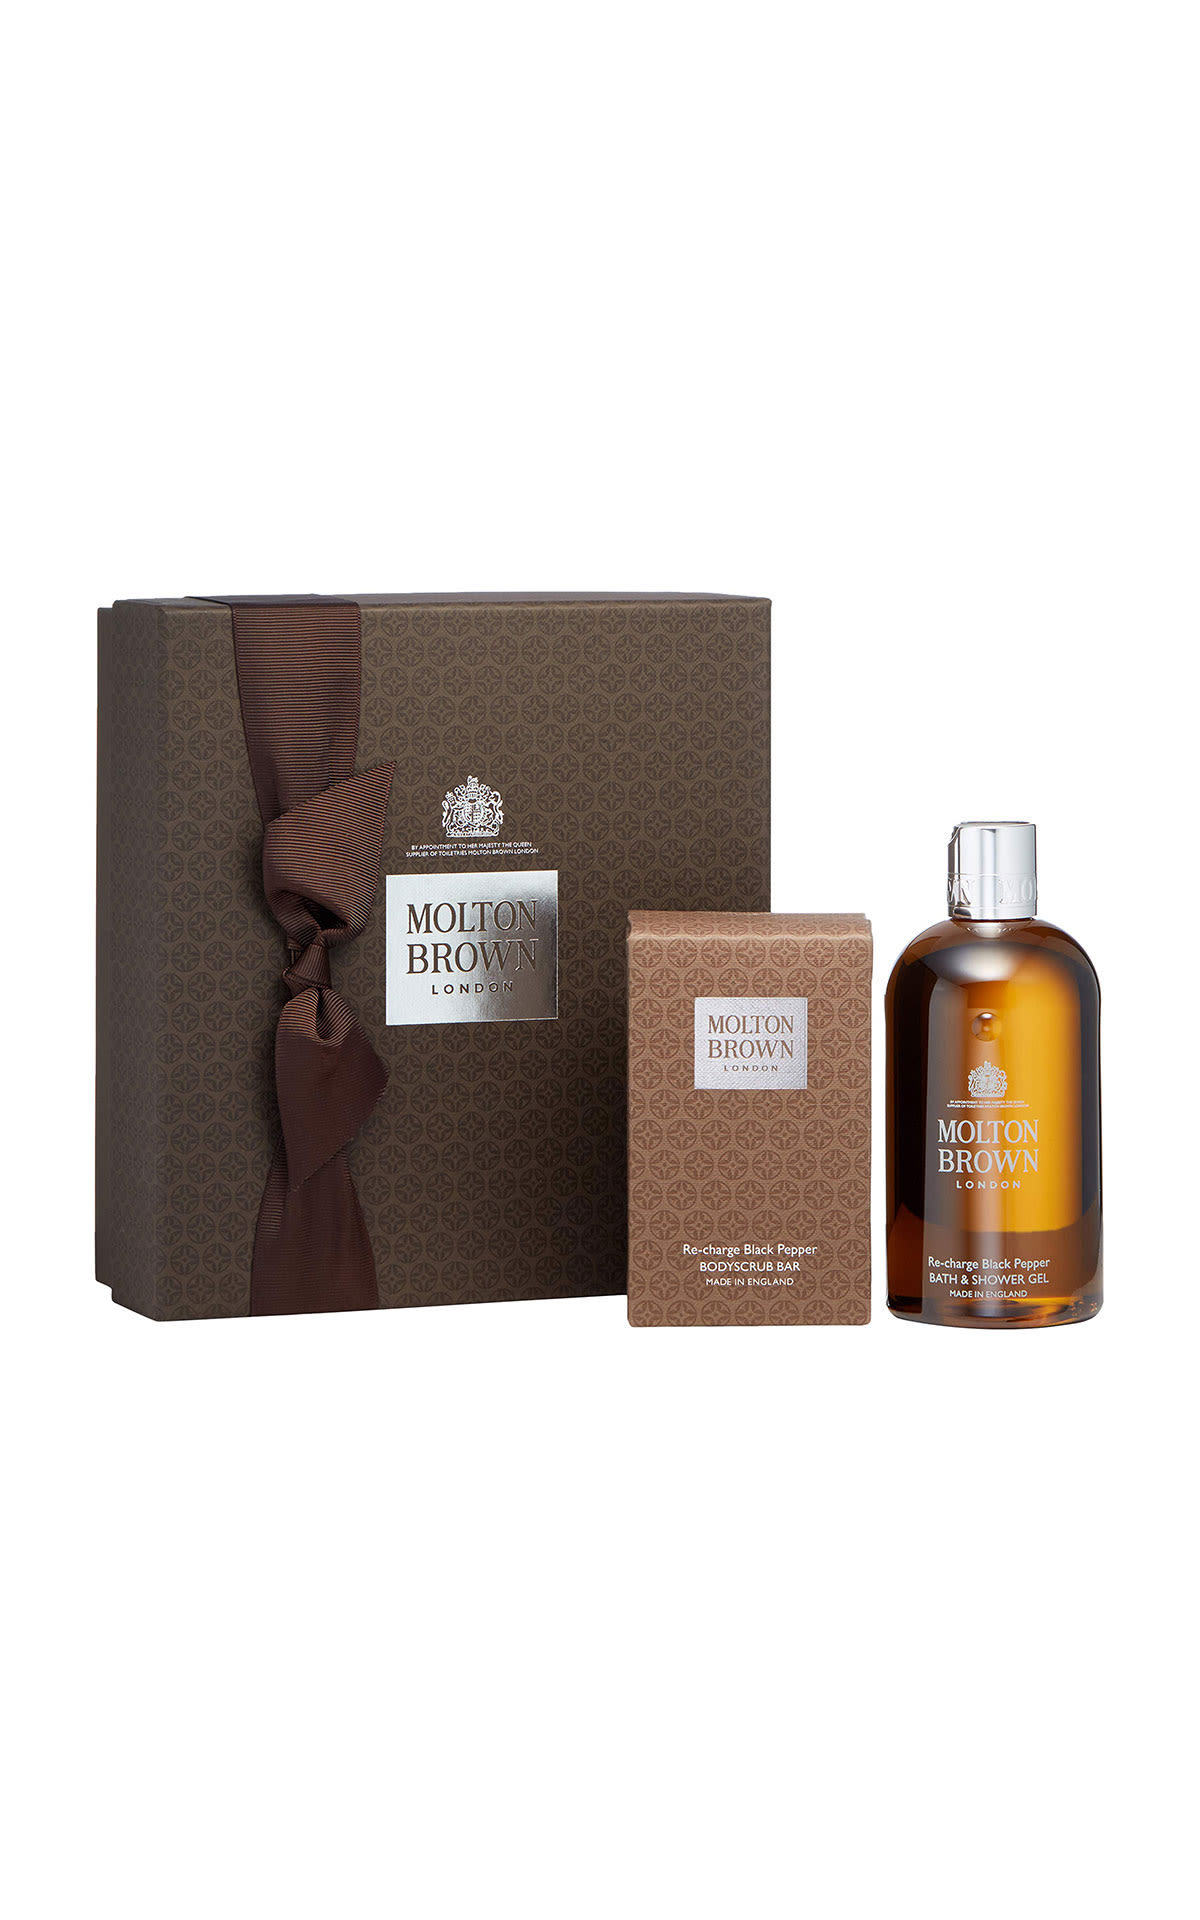 Molton Brown Re-charge black pepper set from Bicester Village